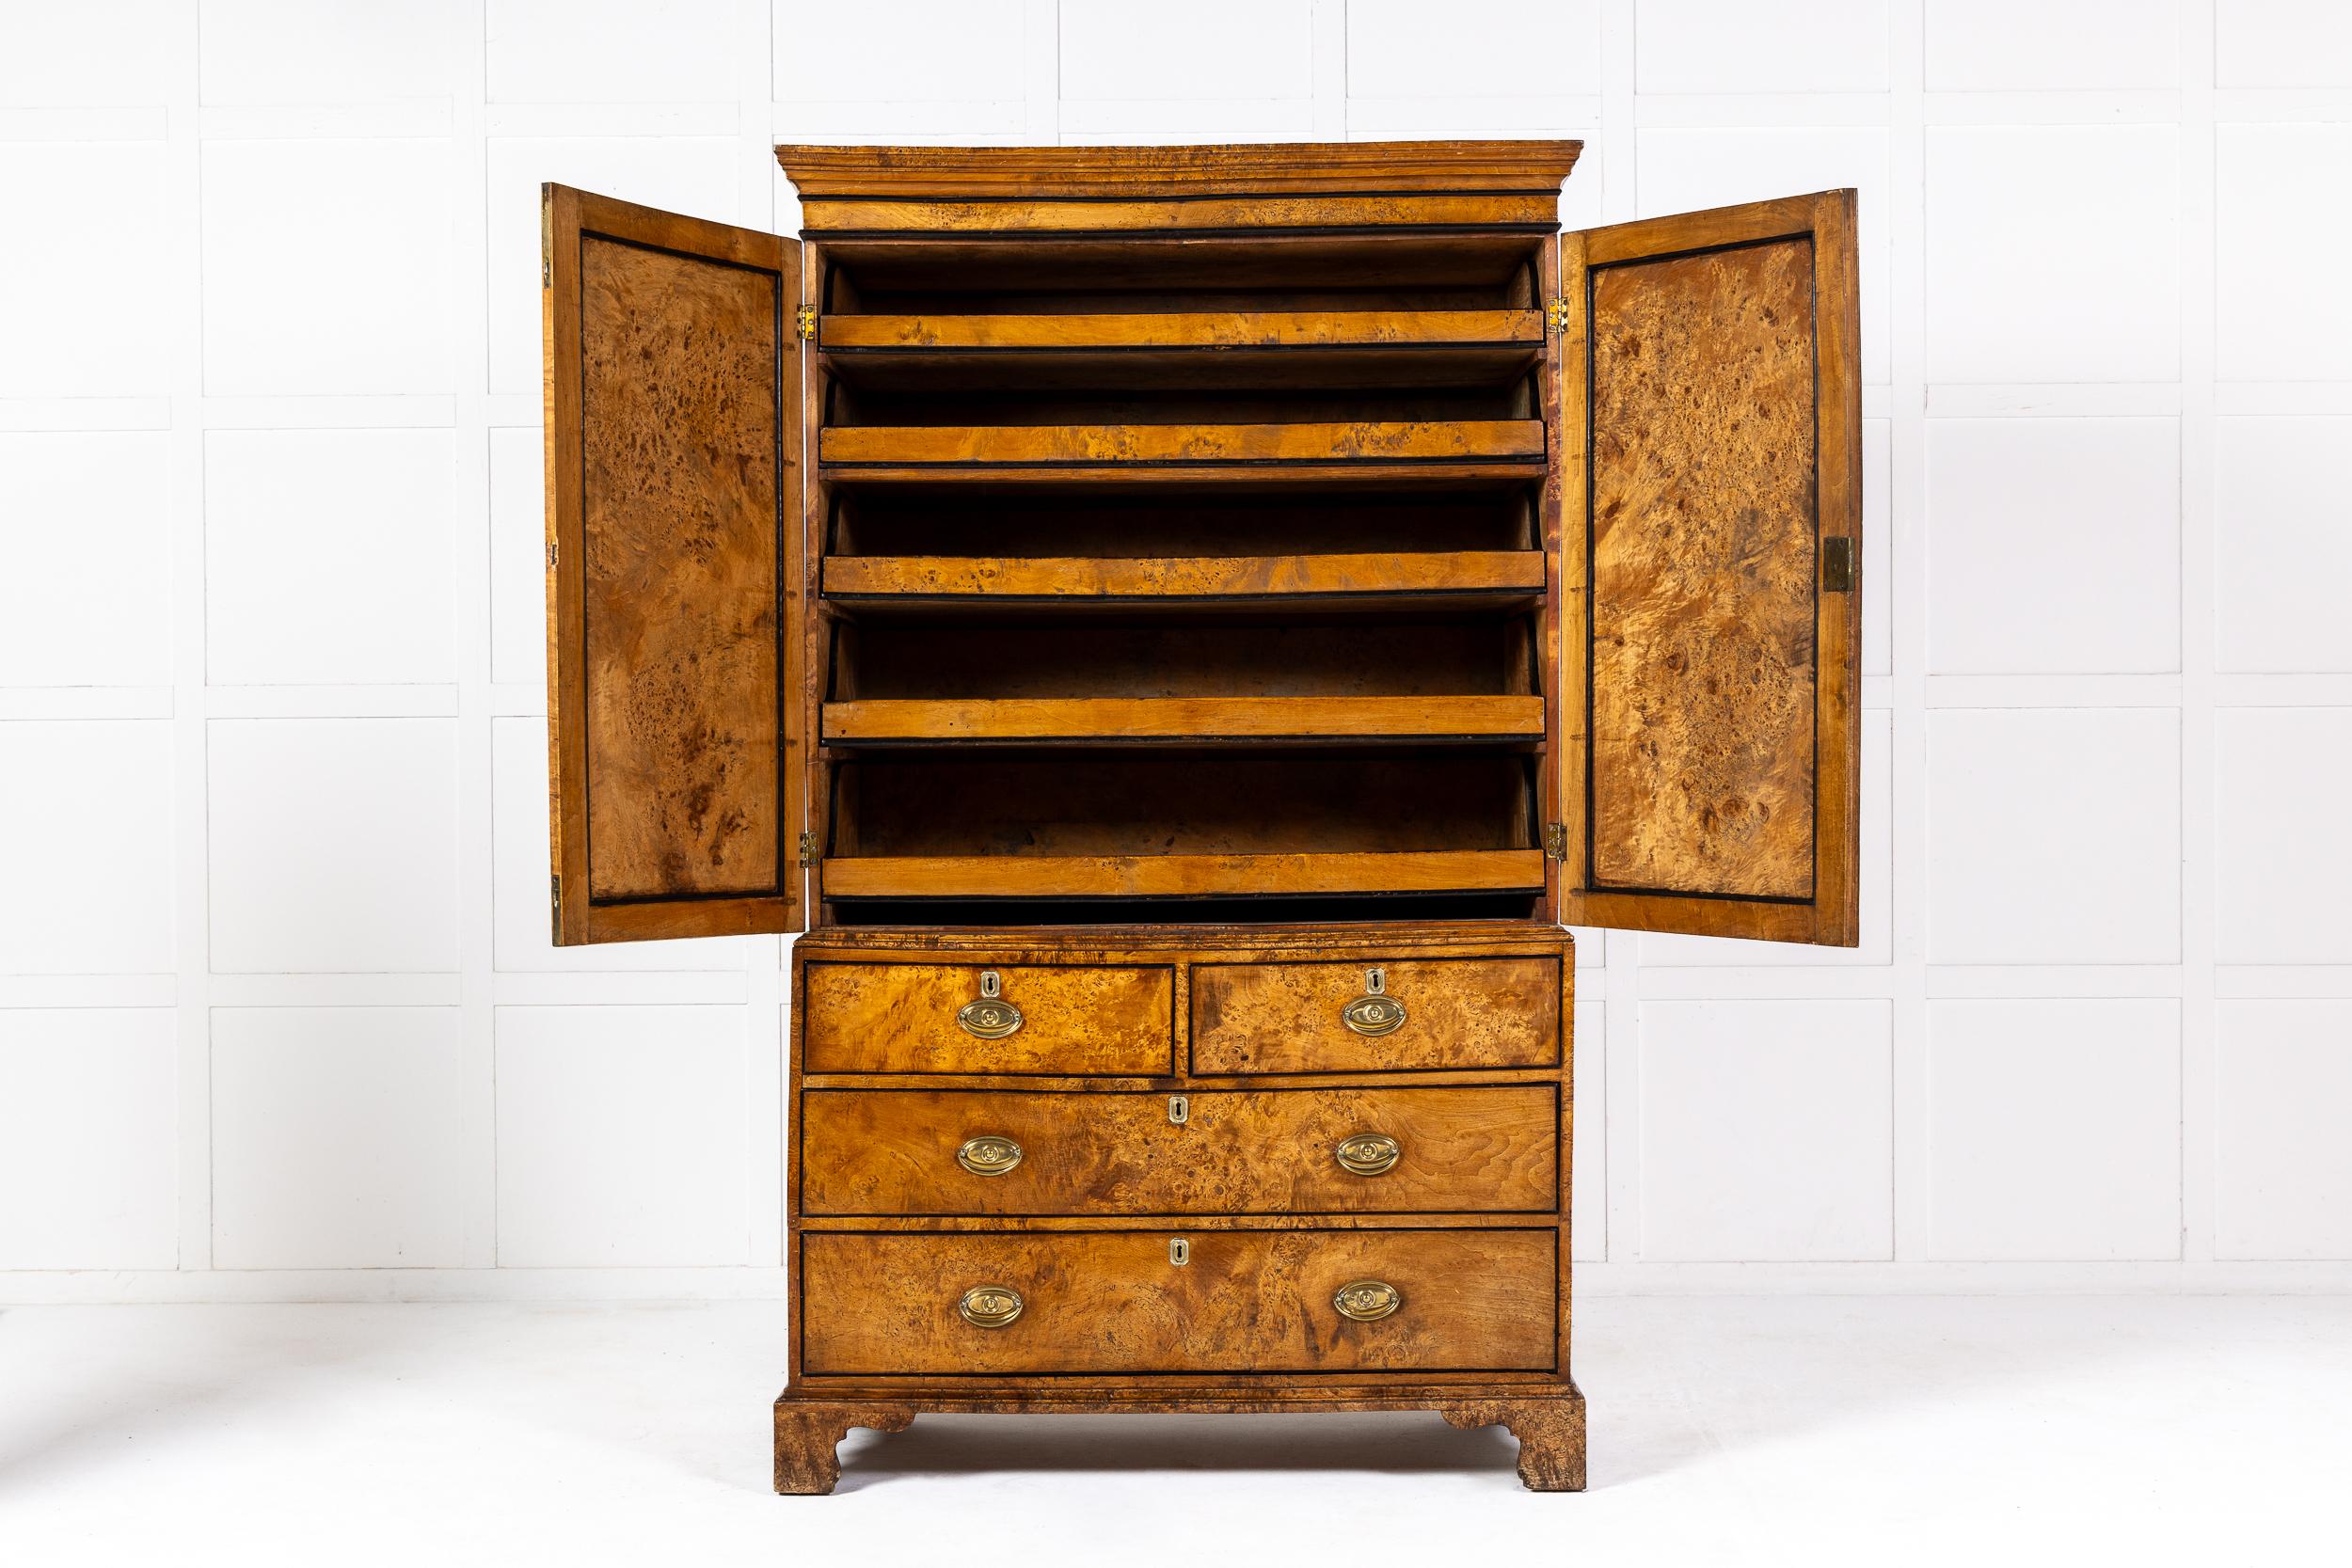 A Late 18th or Early 19th Century Linen Press Cupboard Constructed from Solid Sycamore and of Exceptional Colour.

The linen press of typical form with two panelled doors concealing five slides for clothes and linen in the upper section and an